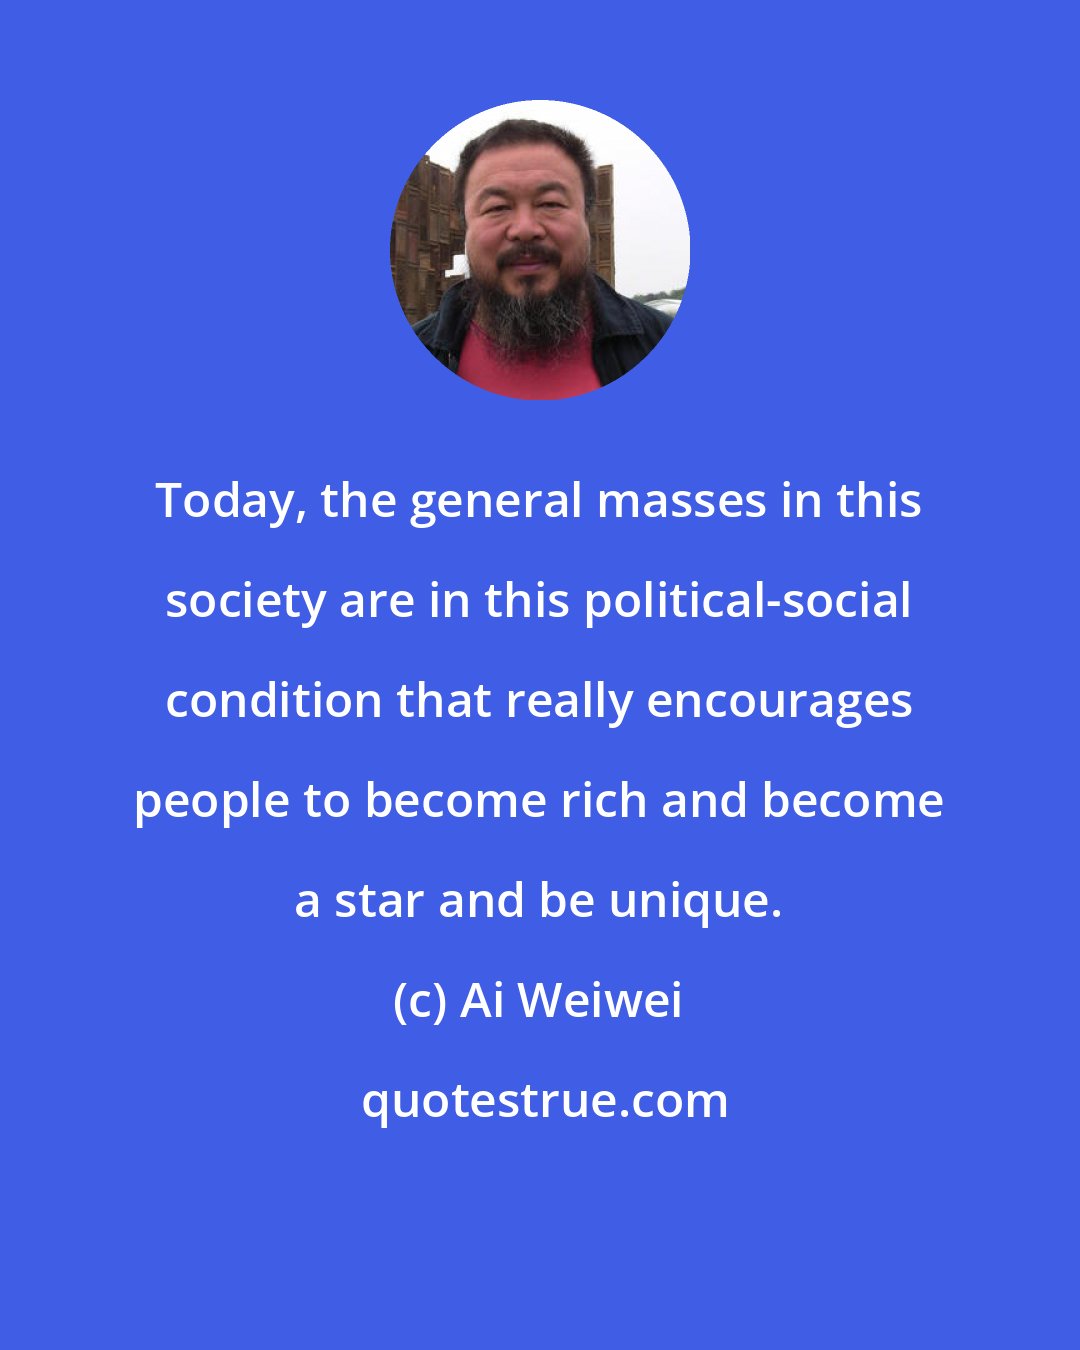 Ai Weiwei: Today, the general masses in this society are in this political-social condition that really encourages people to become rich and become a star and be unique.